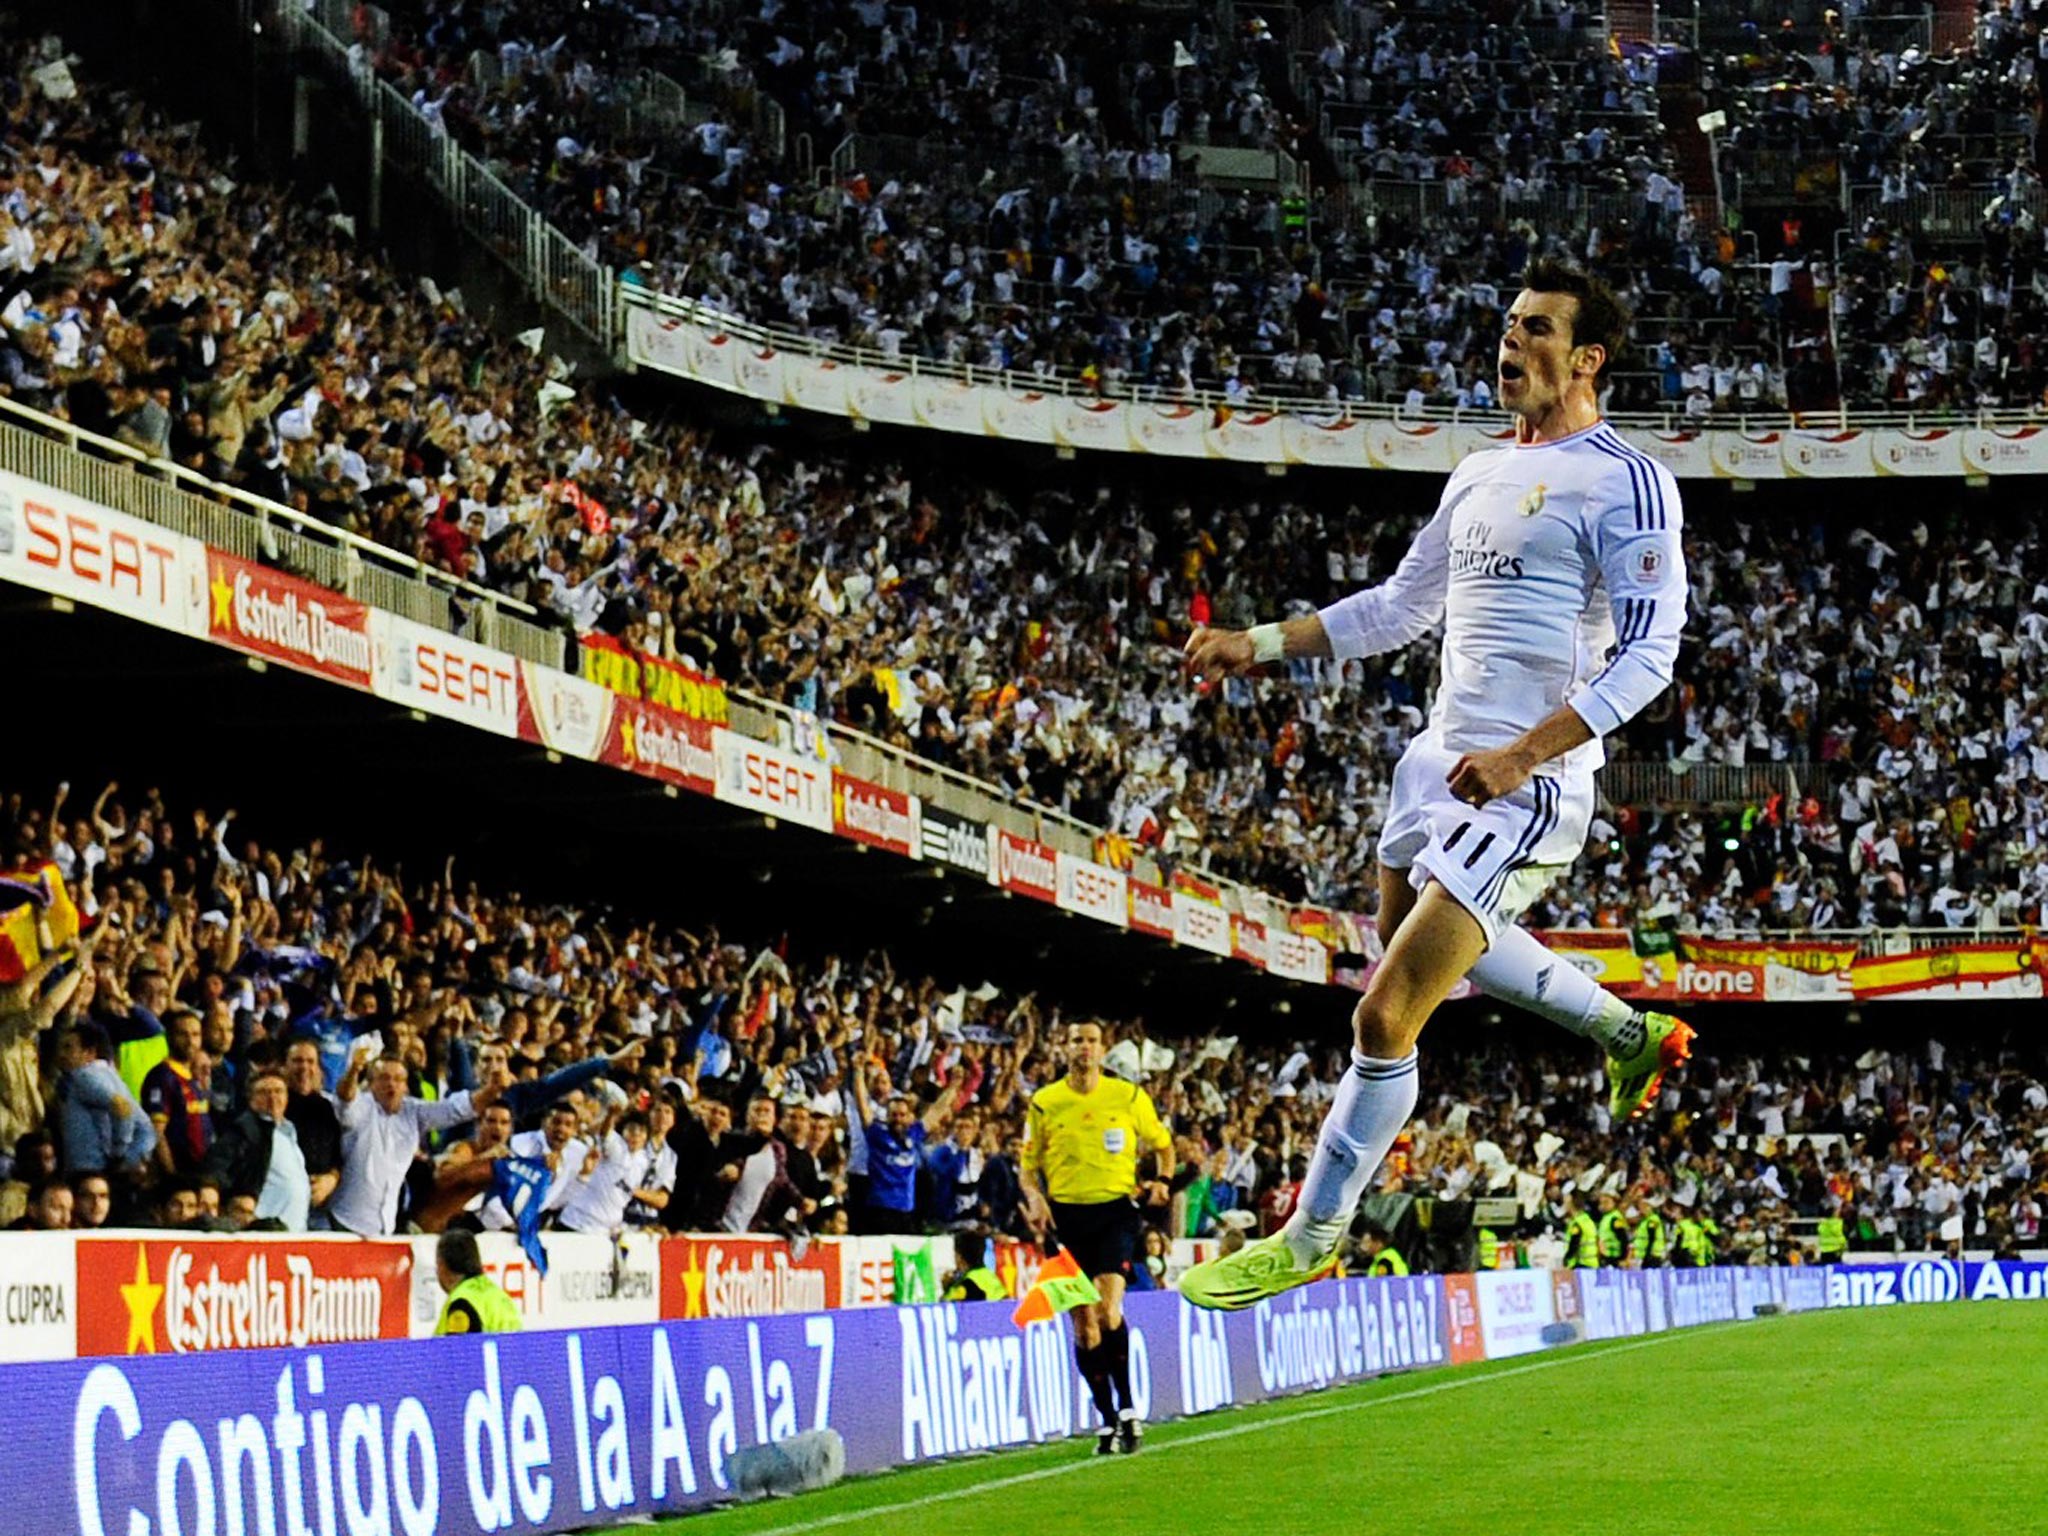 Gareth Bale celebrates scoring the winning goal for Real Madrid int he 2-1 Copa del Rey final victory over Barcelona